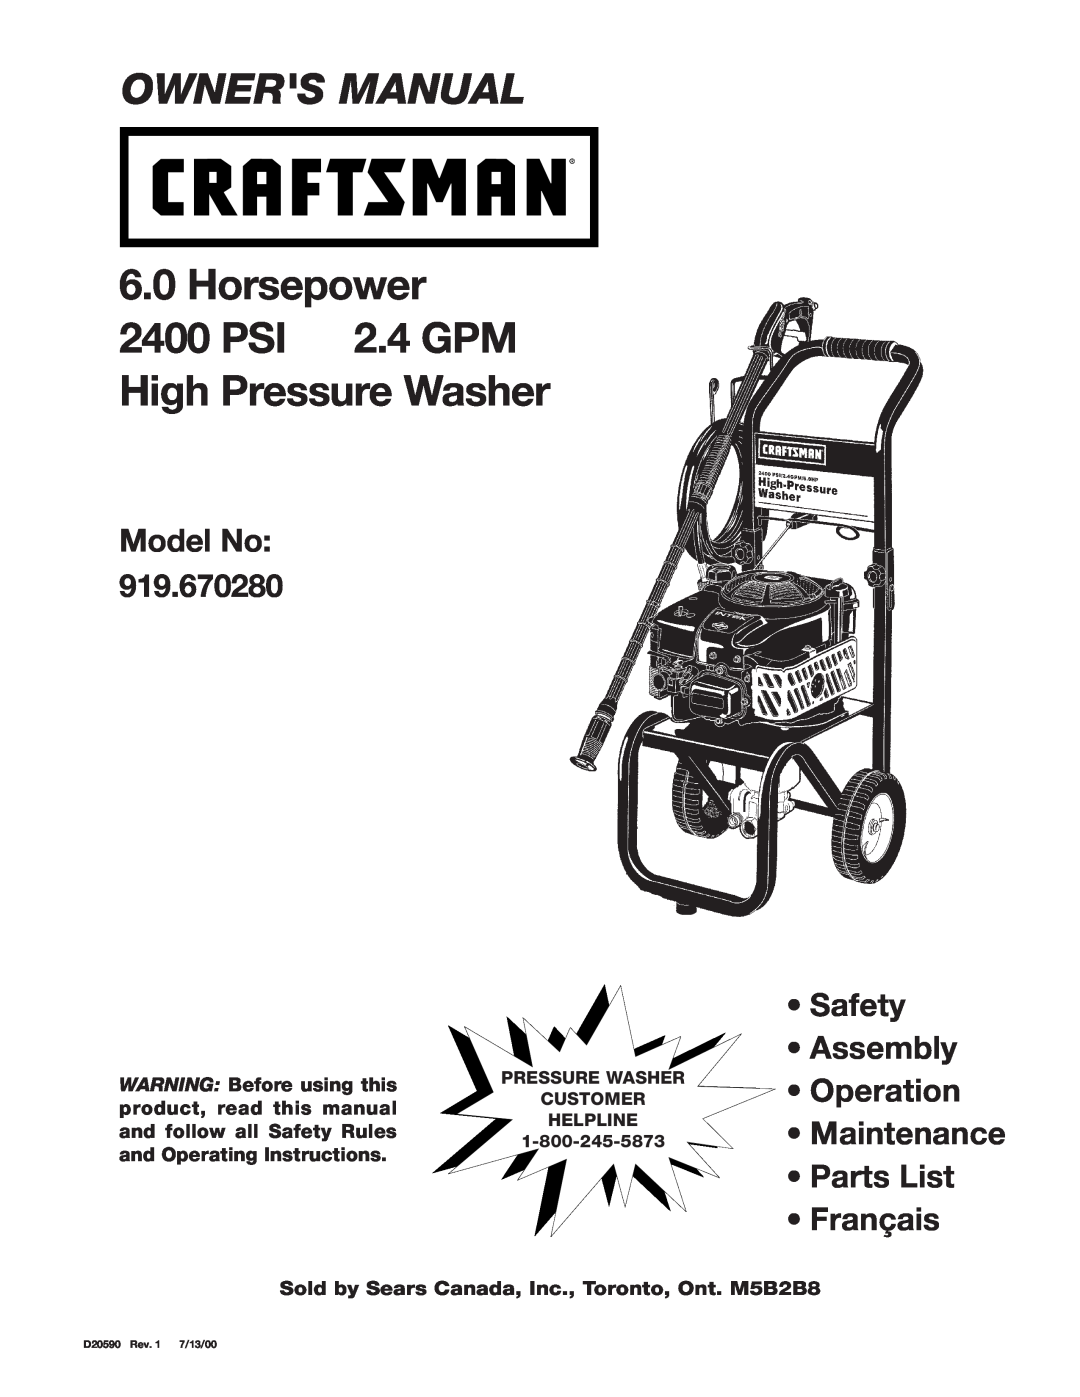 Craftsman D20590 owner manual Owners Manual, Horsepower 2400 PSI 2.4 GPM, High Pressure Washer, Model No, Customer 